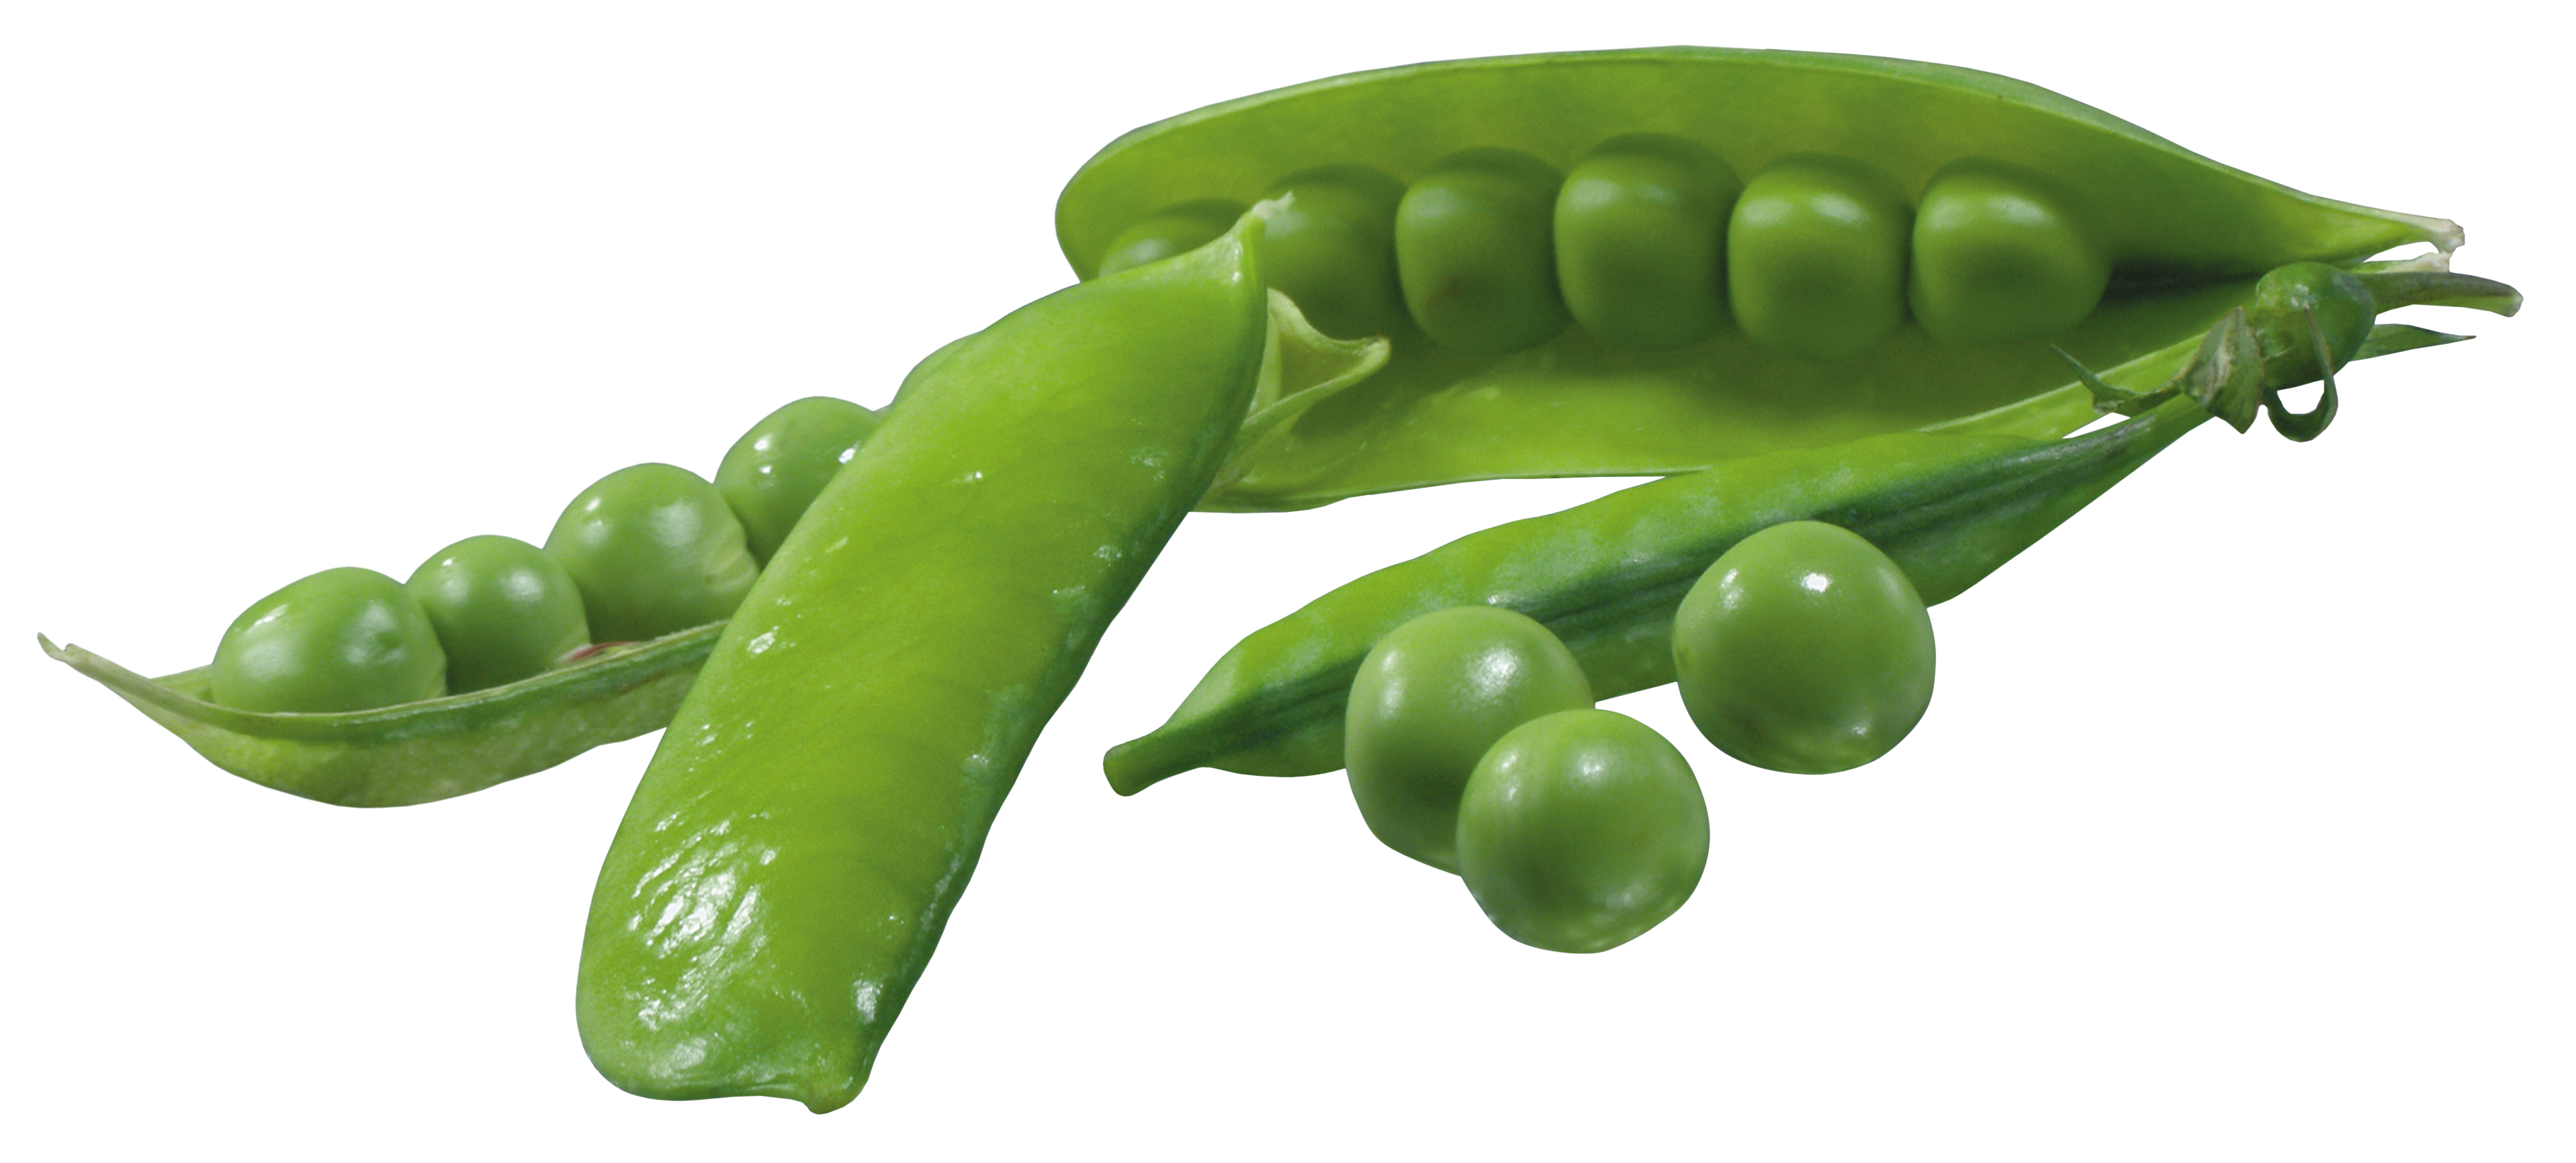 Peas clipart winter. Pea pods png picture